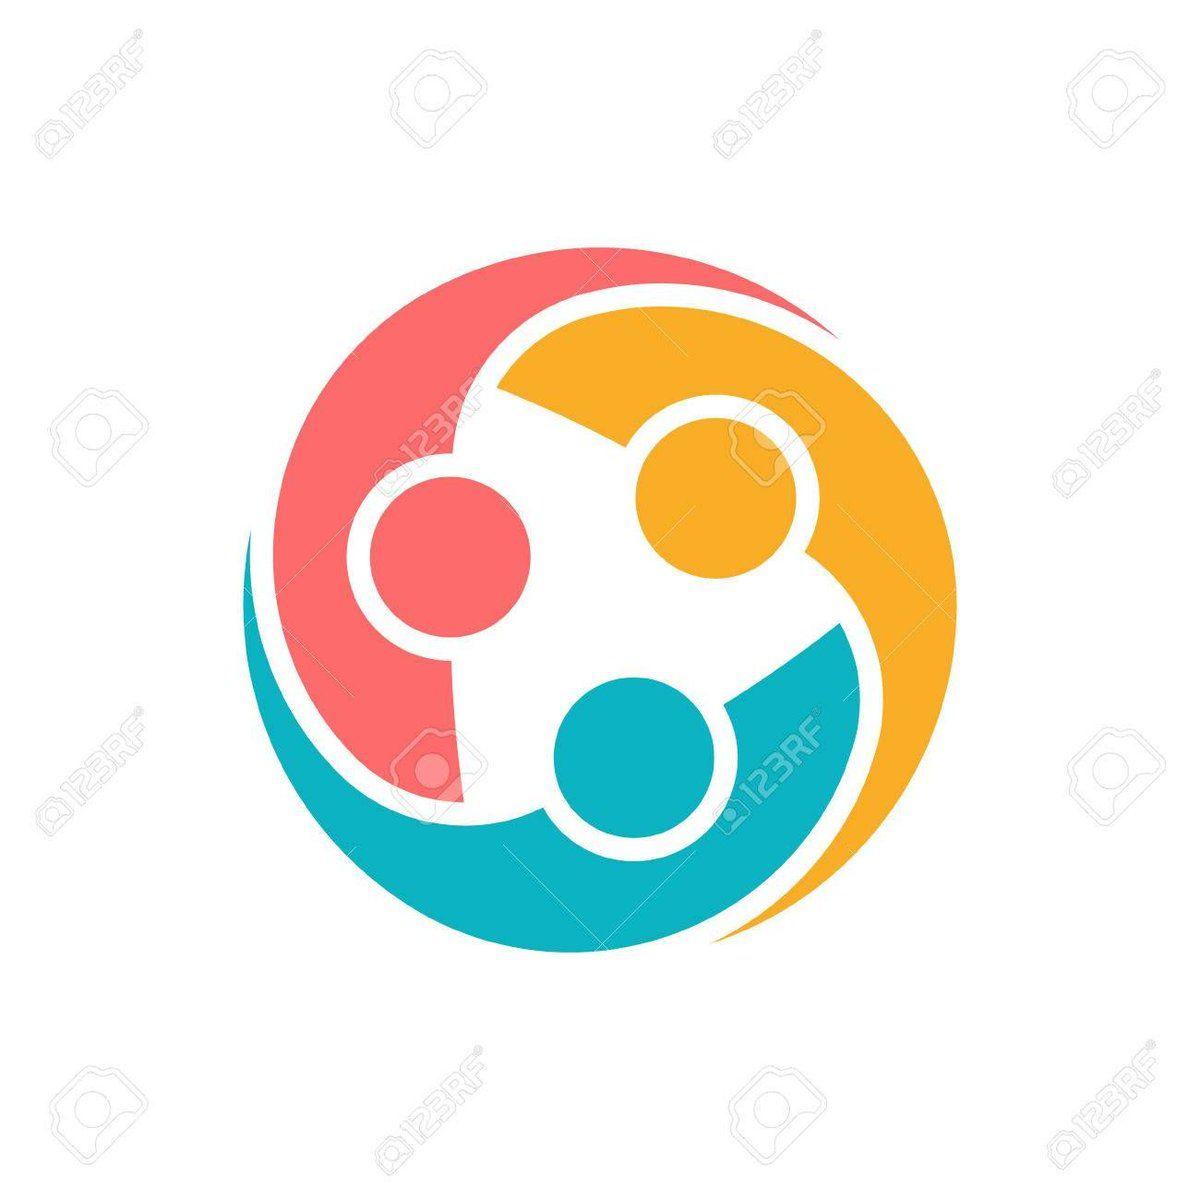 Person Group Logo - LogoStockimage - “People Protection Group Logo. Vector